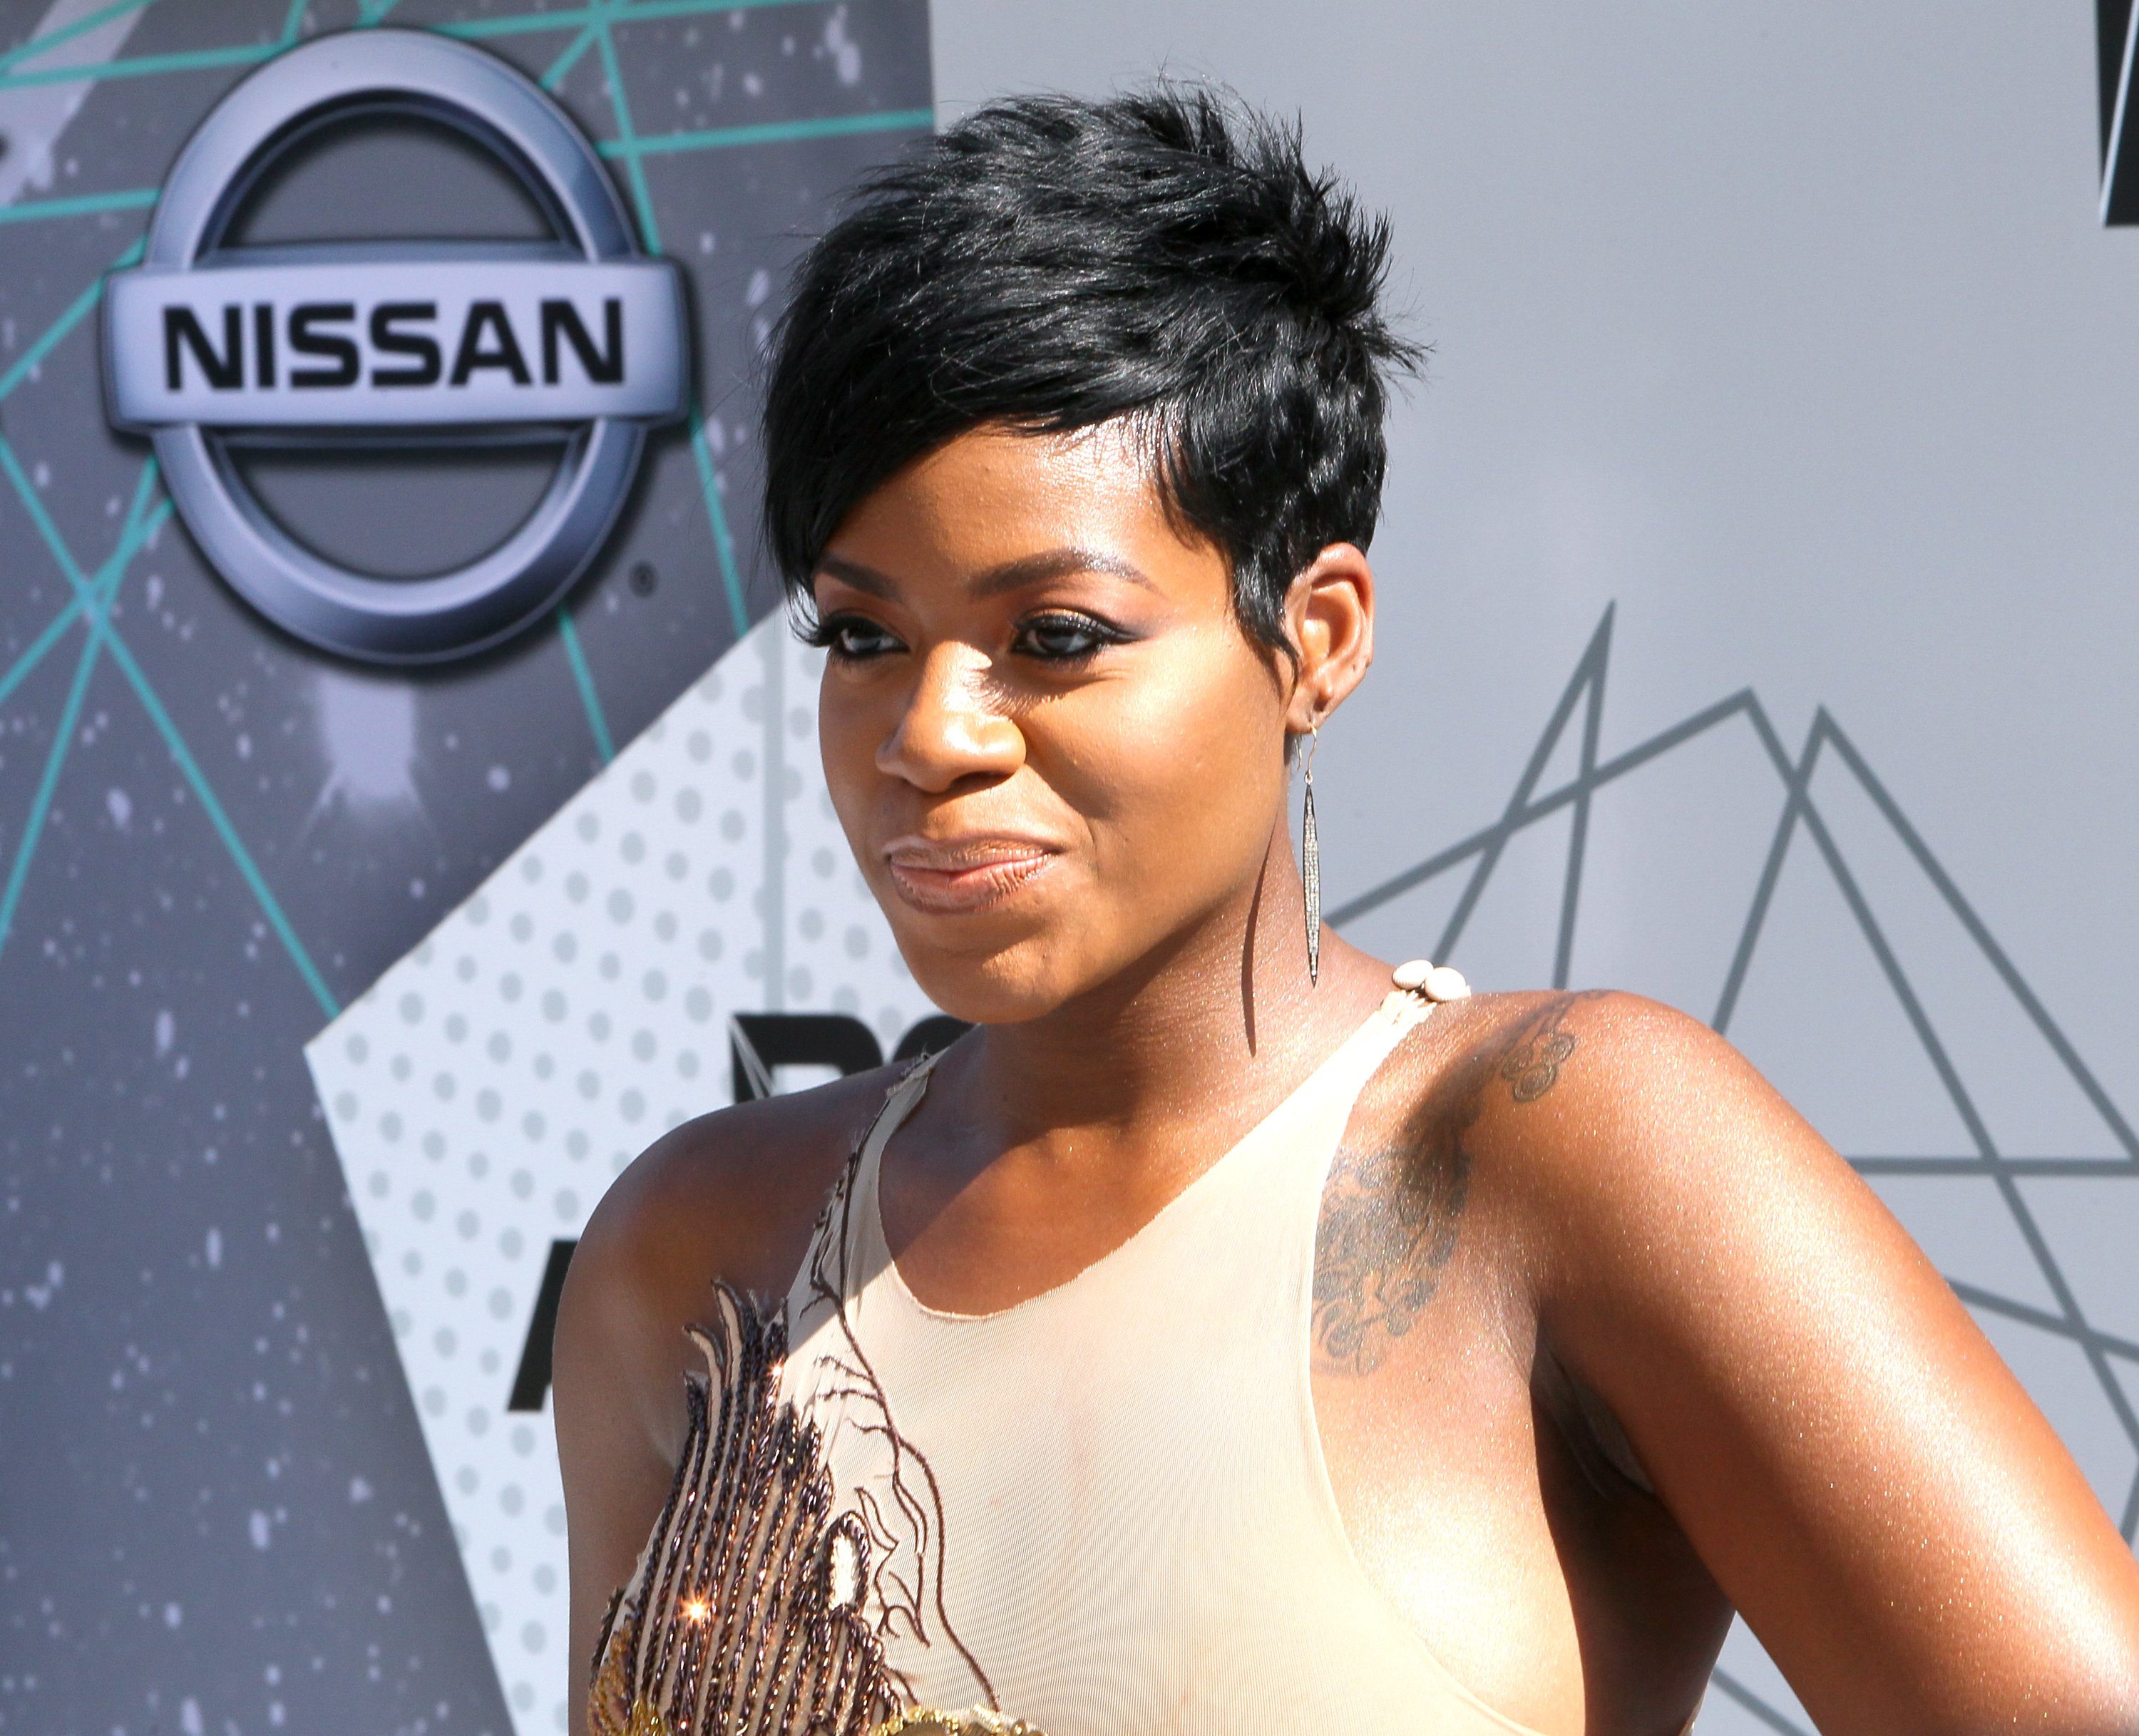 Fantasia Barrino attends the 2016 BET Awards at Microsoft Theater on June 26, 2016 in Los Angeles, California. | Source: Getty Images